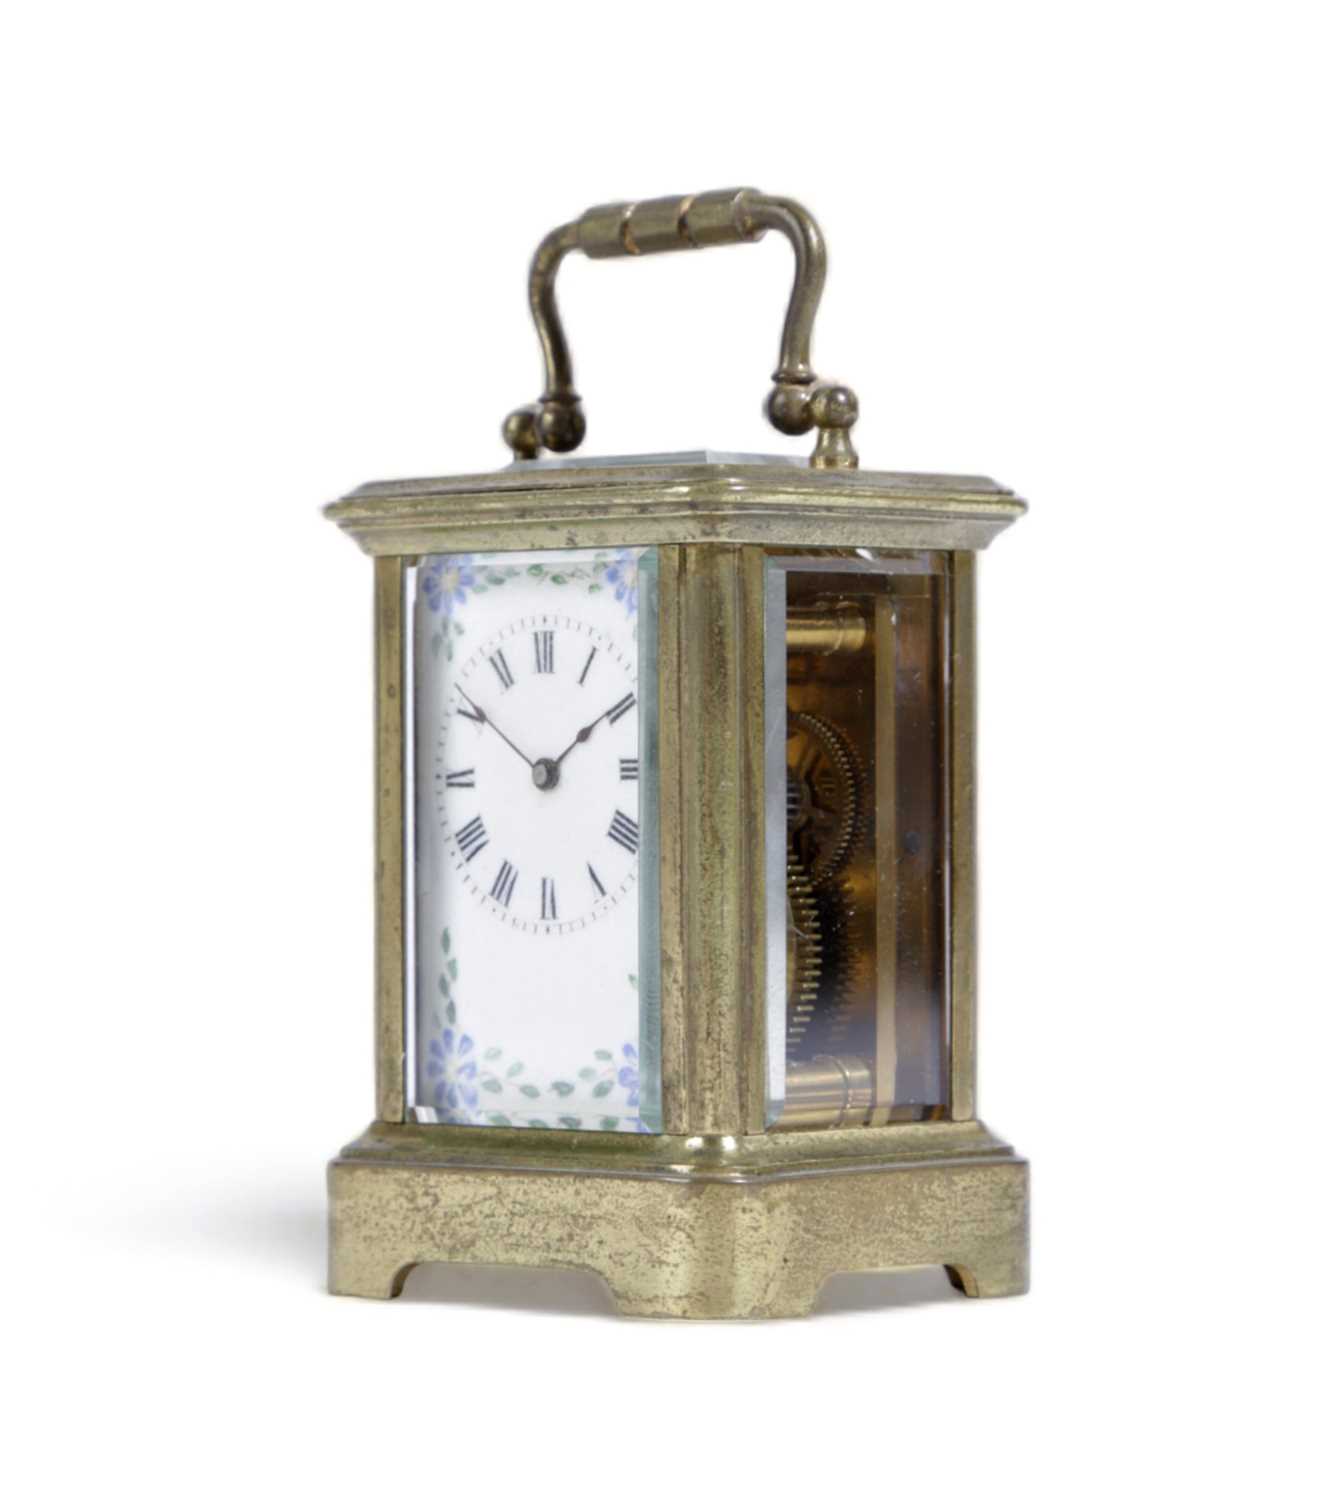 A FRENCH BRASS MINIATURE CARRIAGE TIME PIECE LATE 19TH / EARLY 20TH CENTURY the movement with a